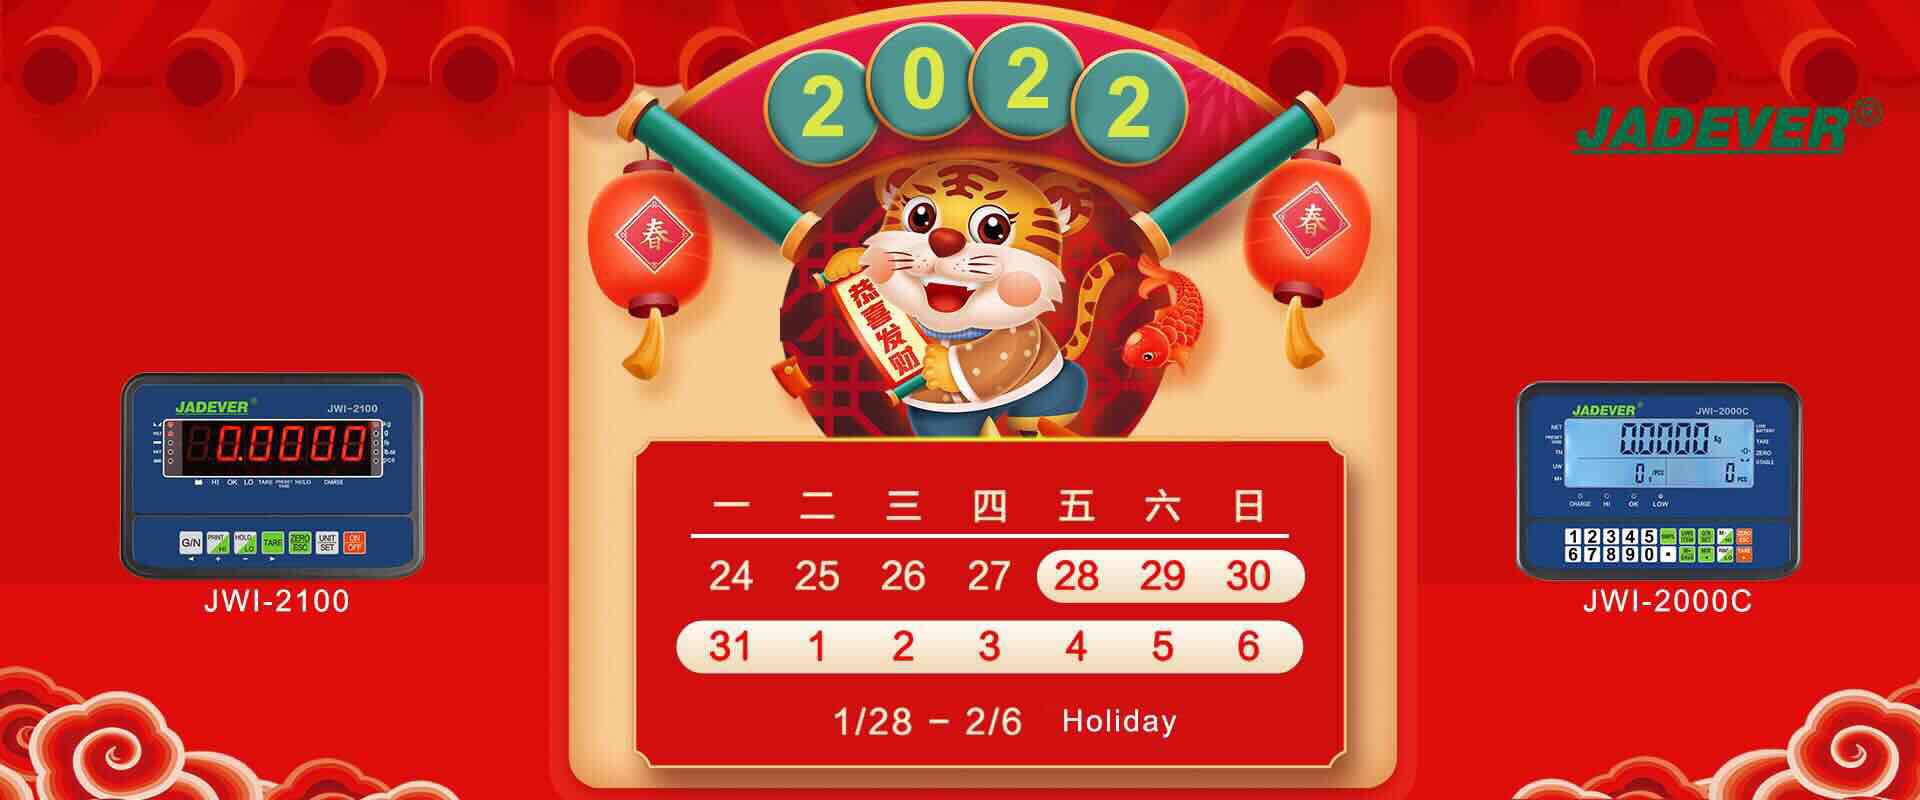 Holiday Notice - Chinese Lunar New Year 2022